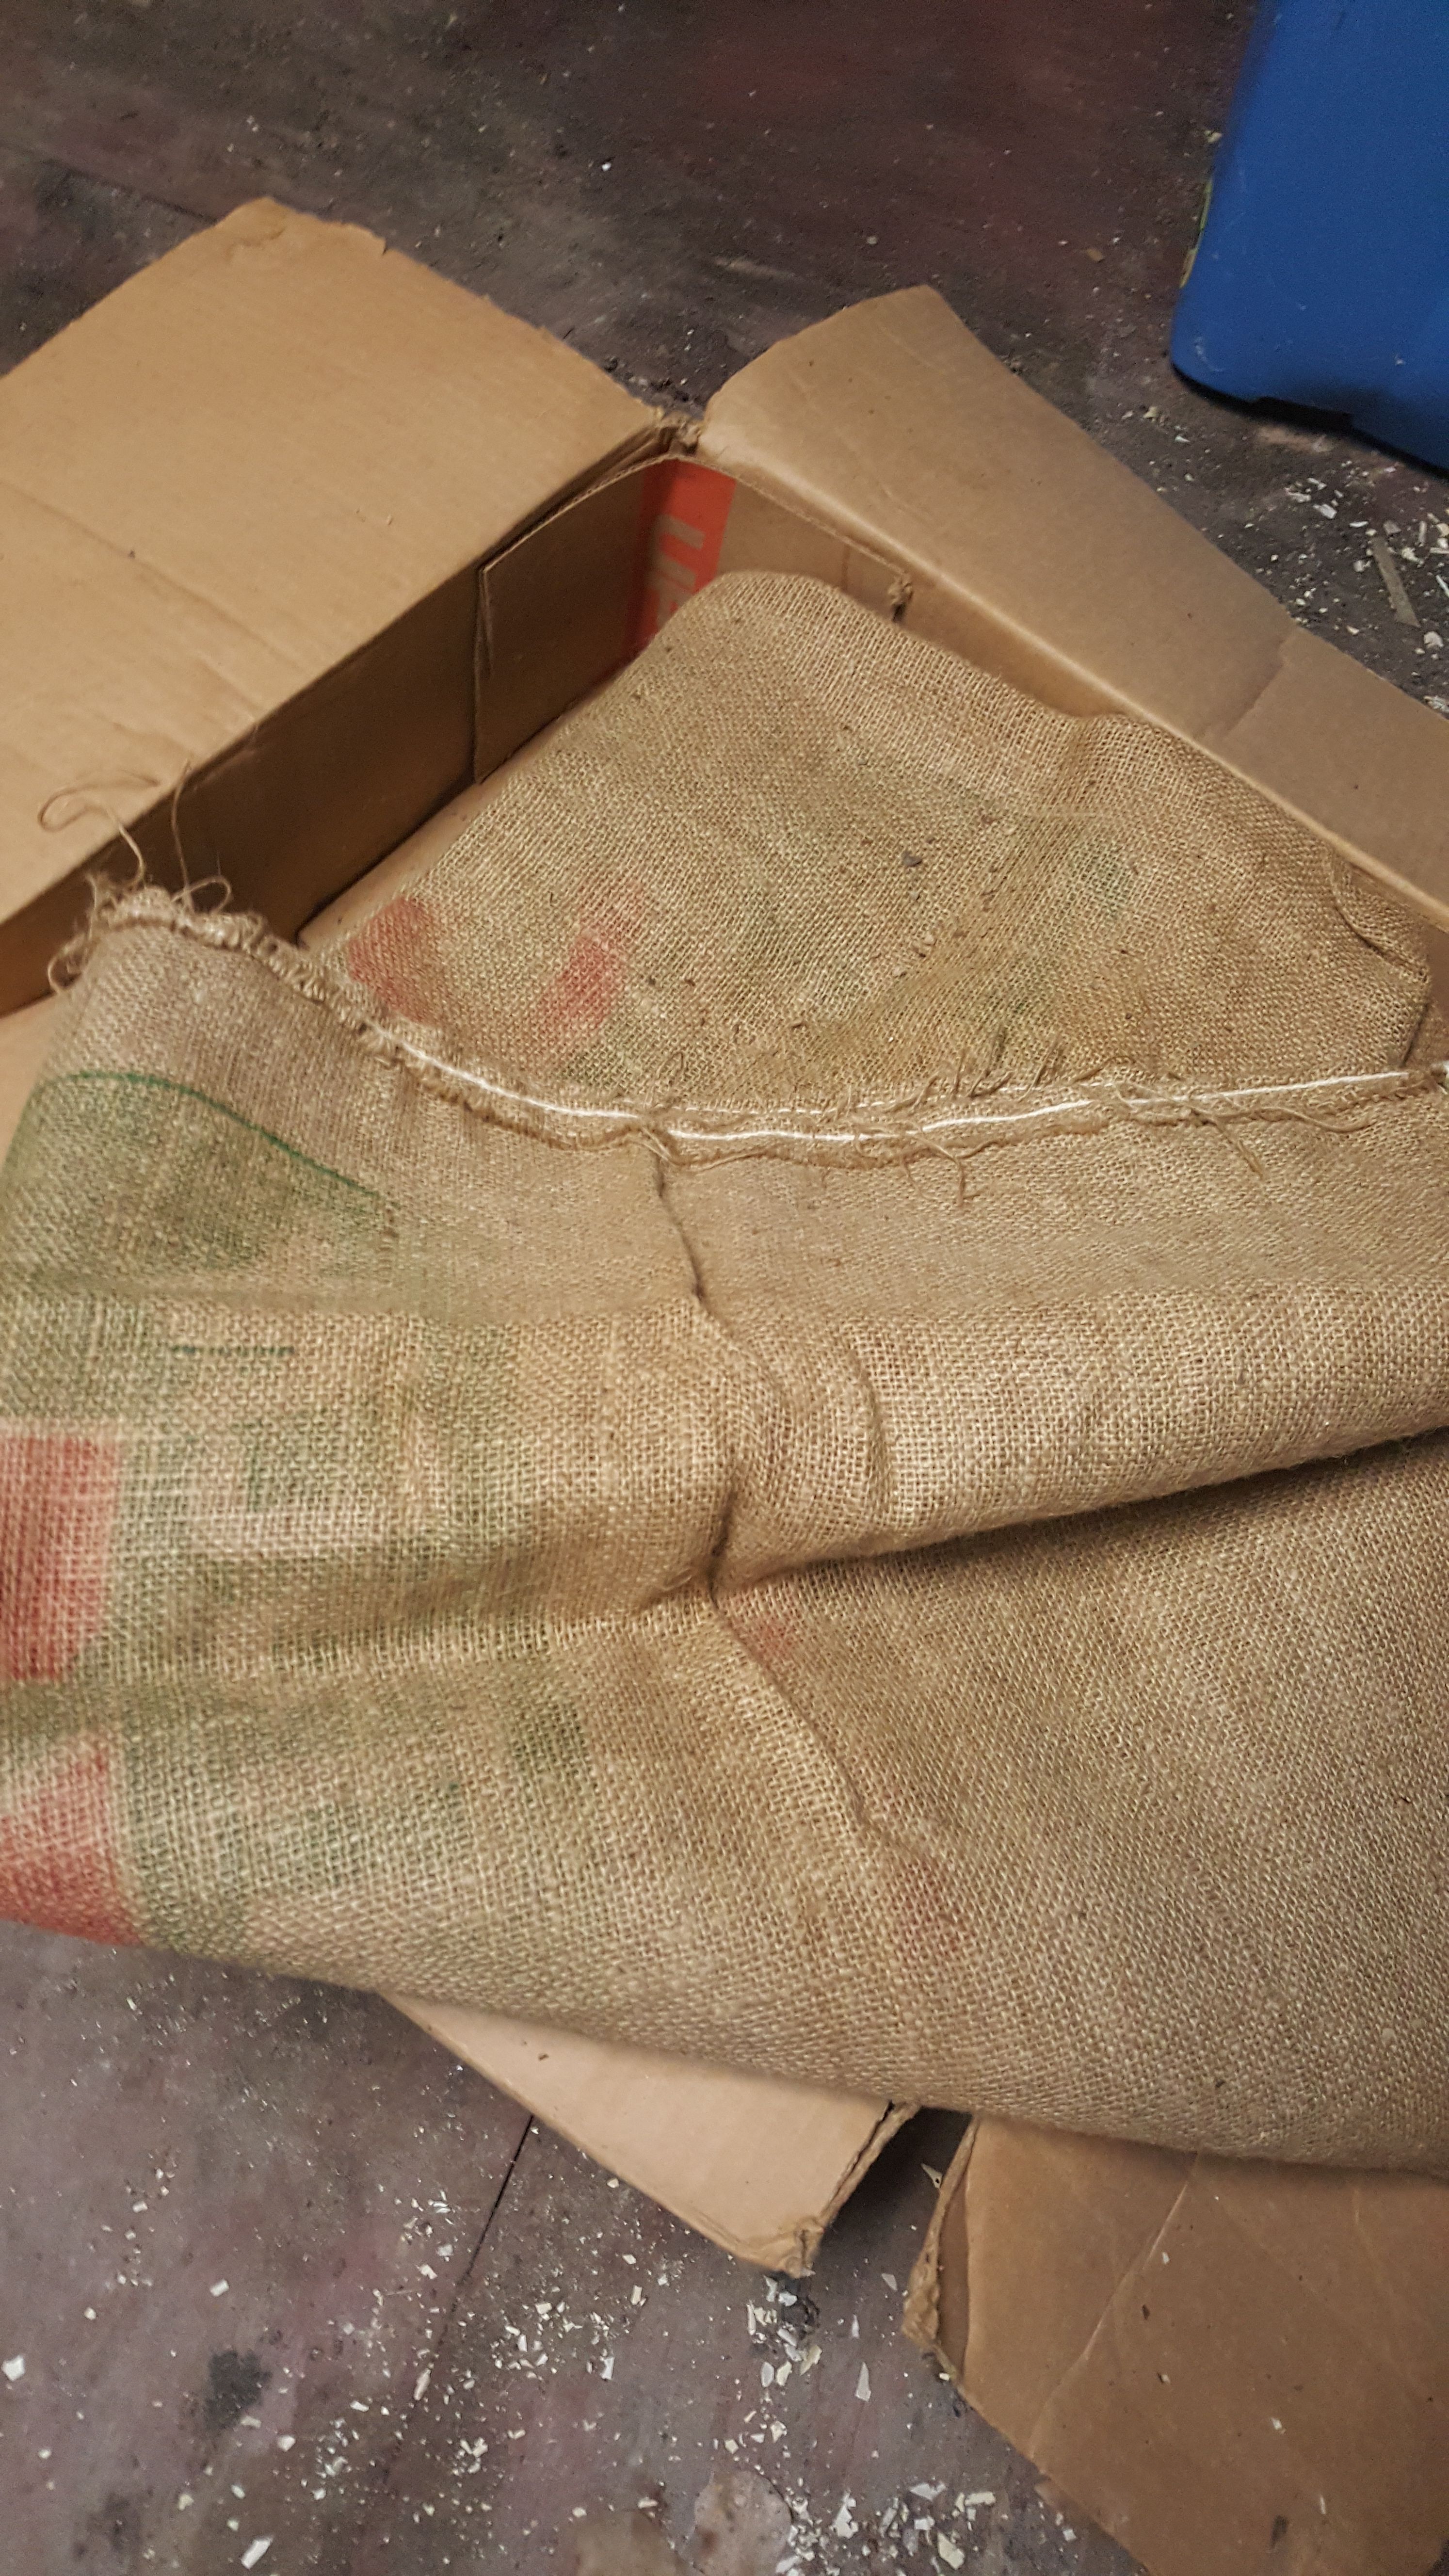 Burlap bags 9 of them all together